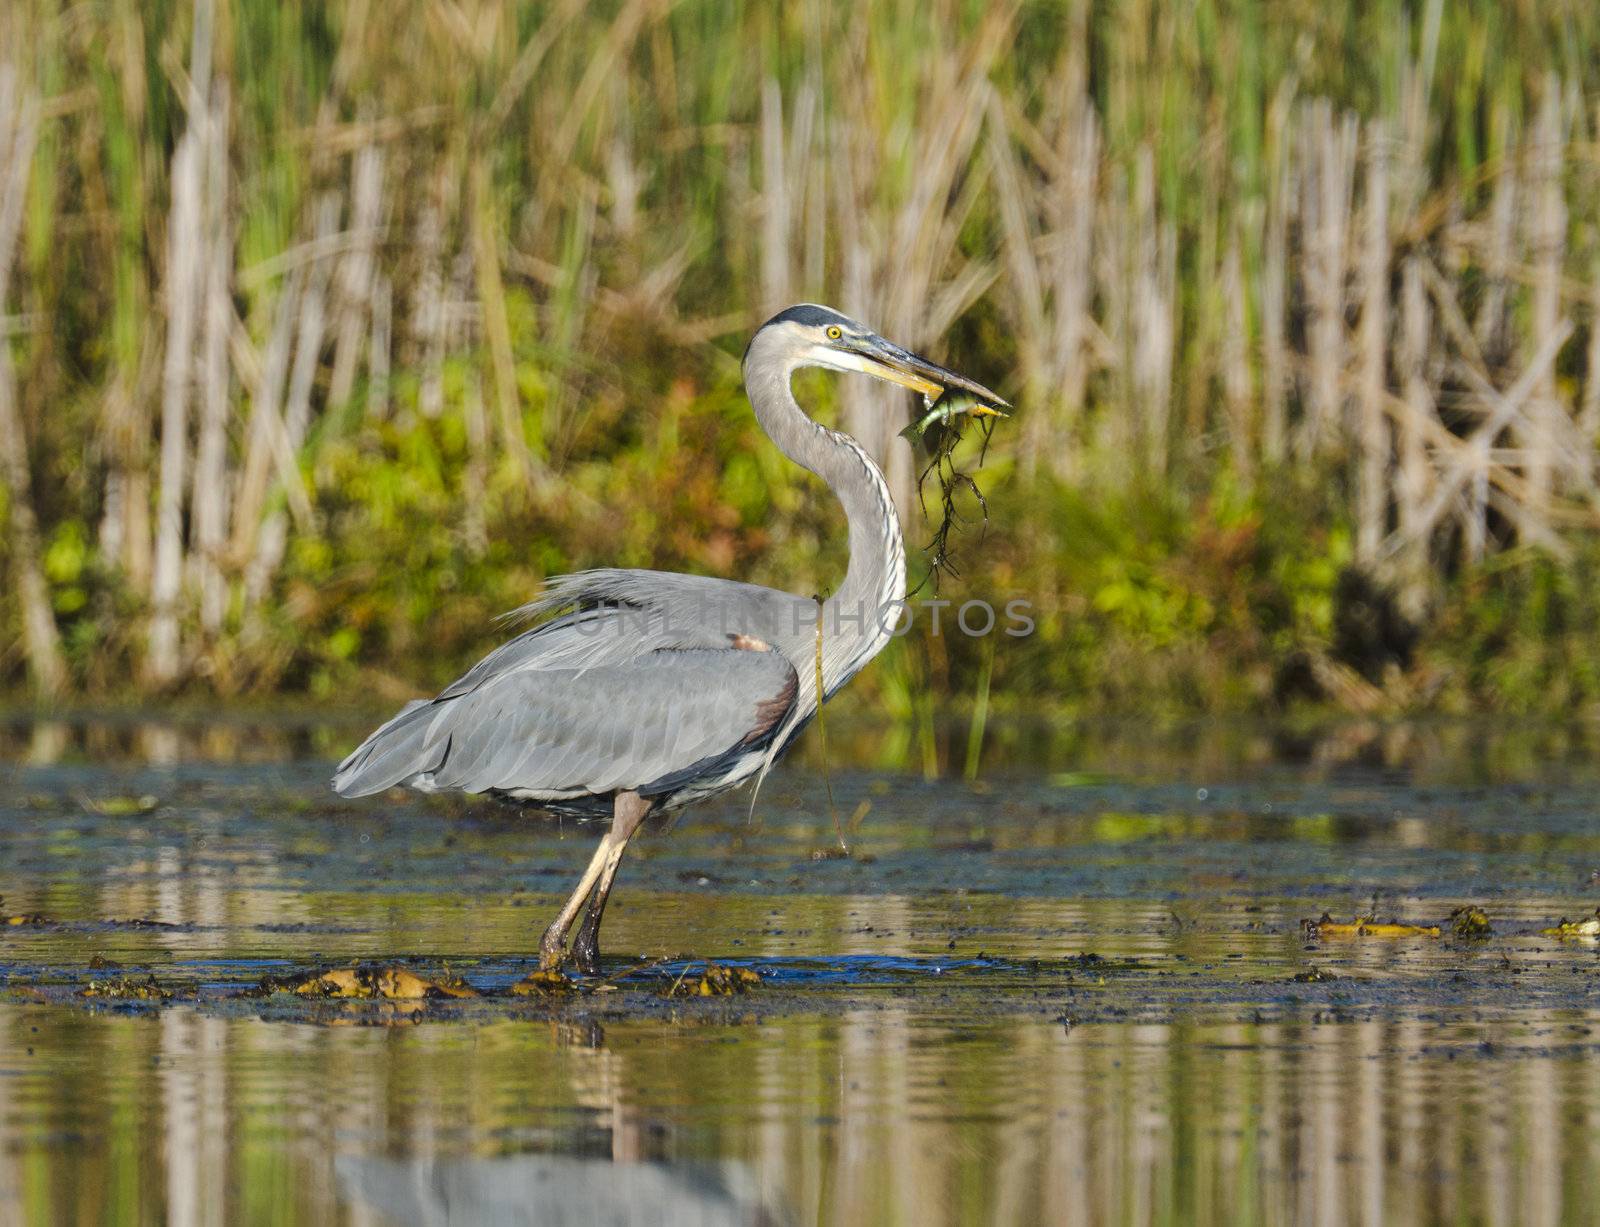 Blue heron with small fish in his beak